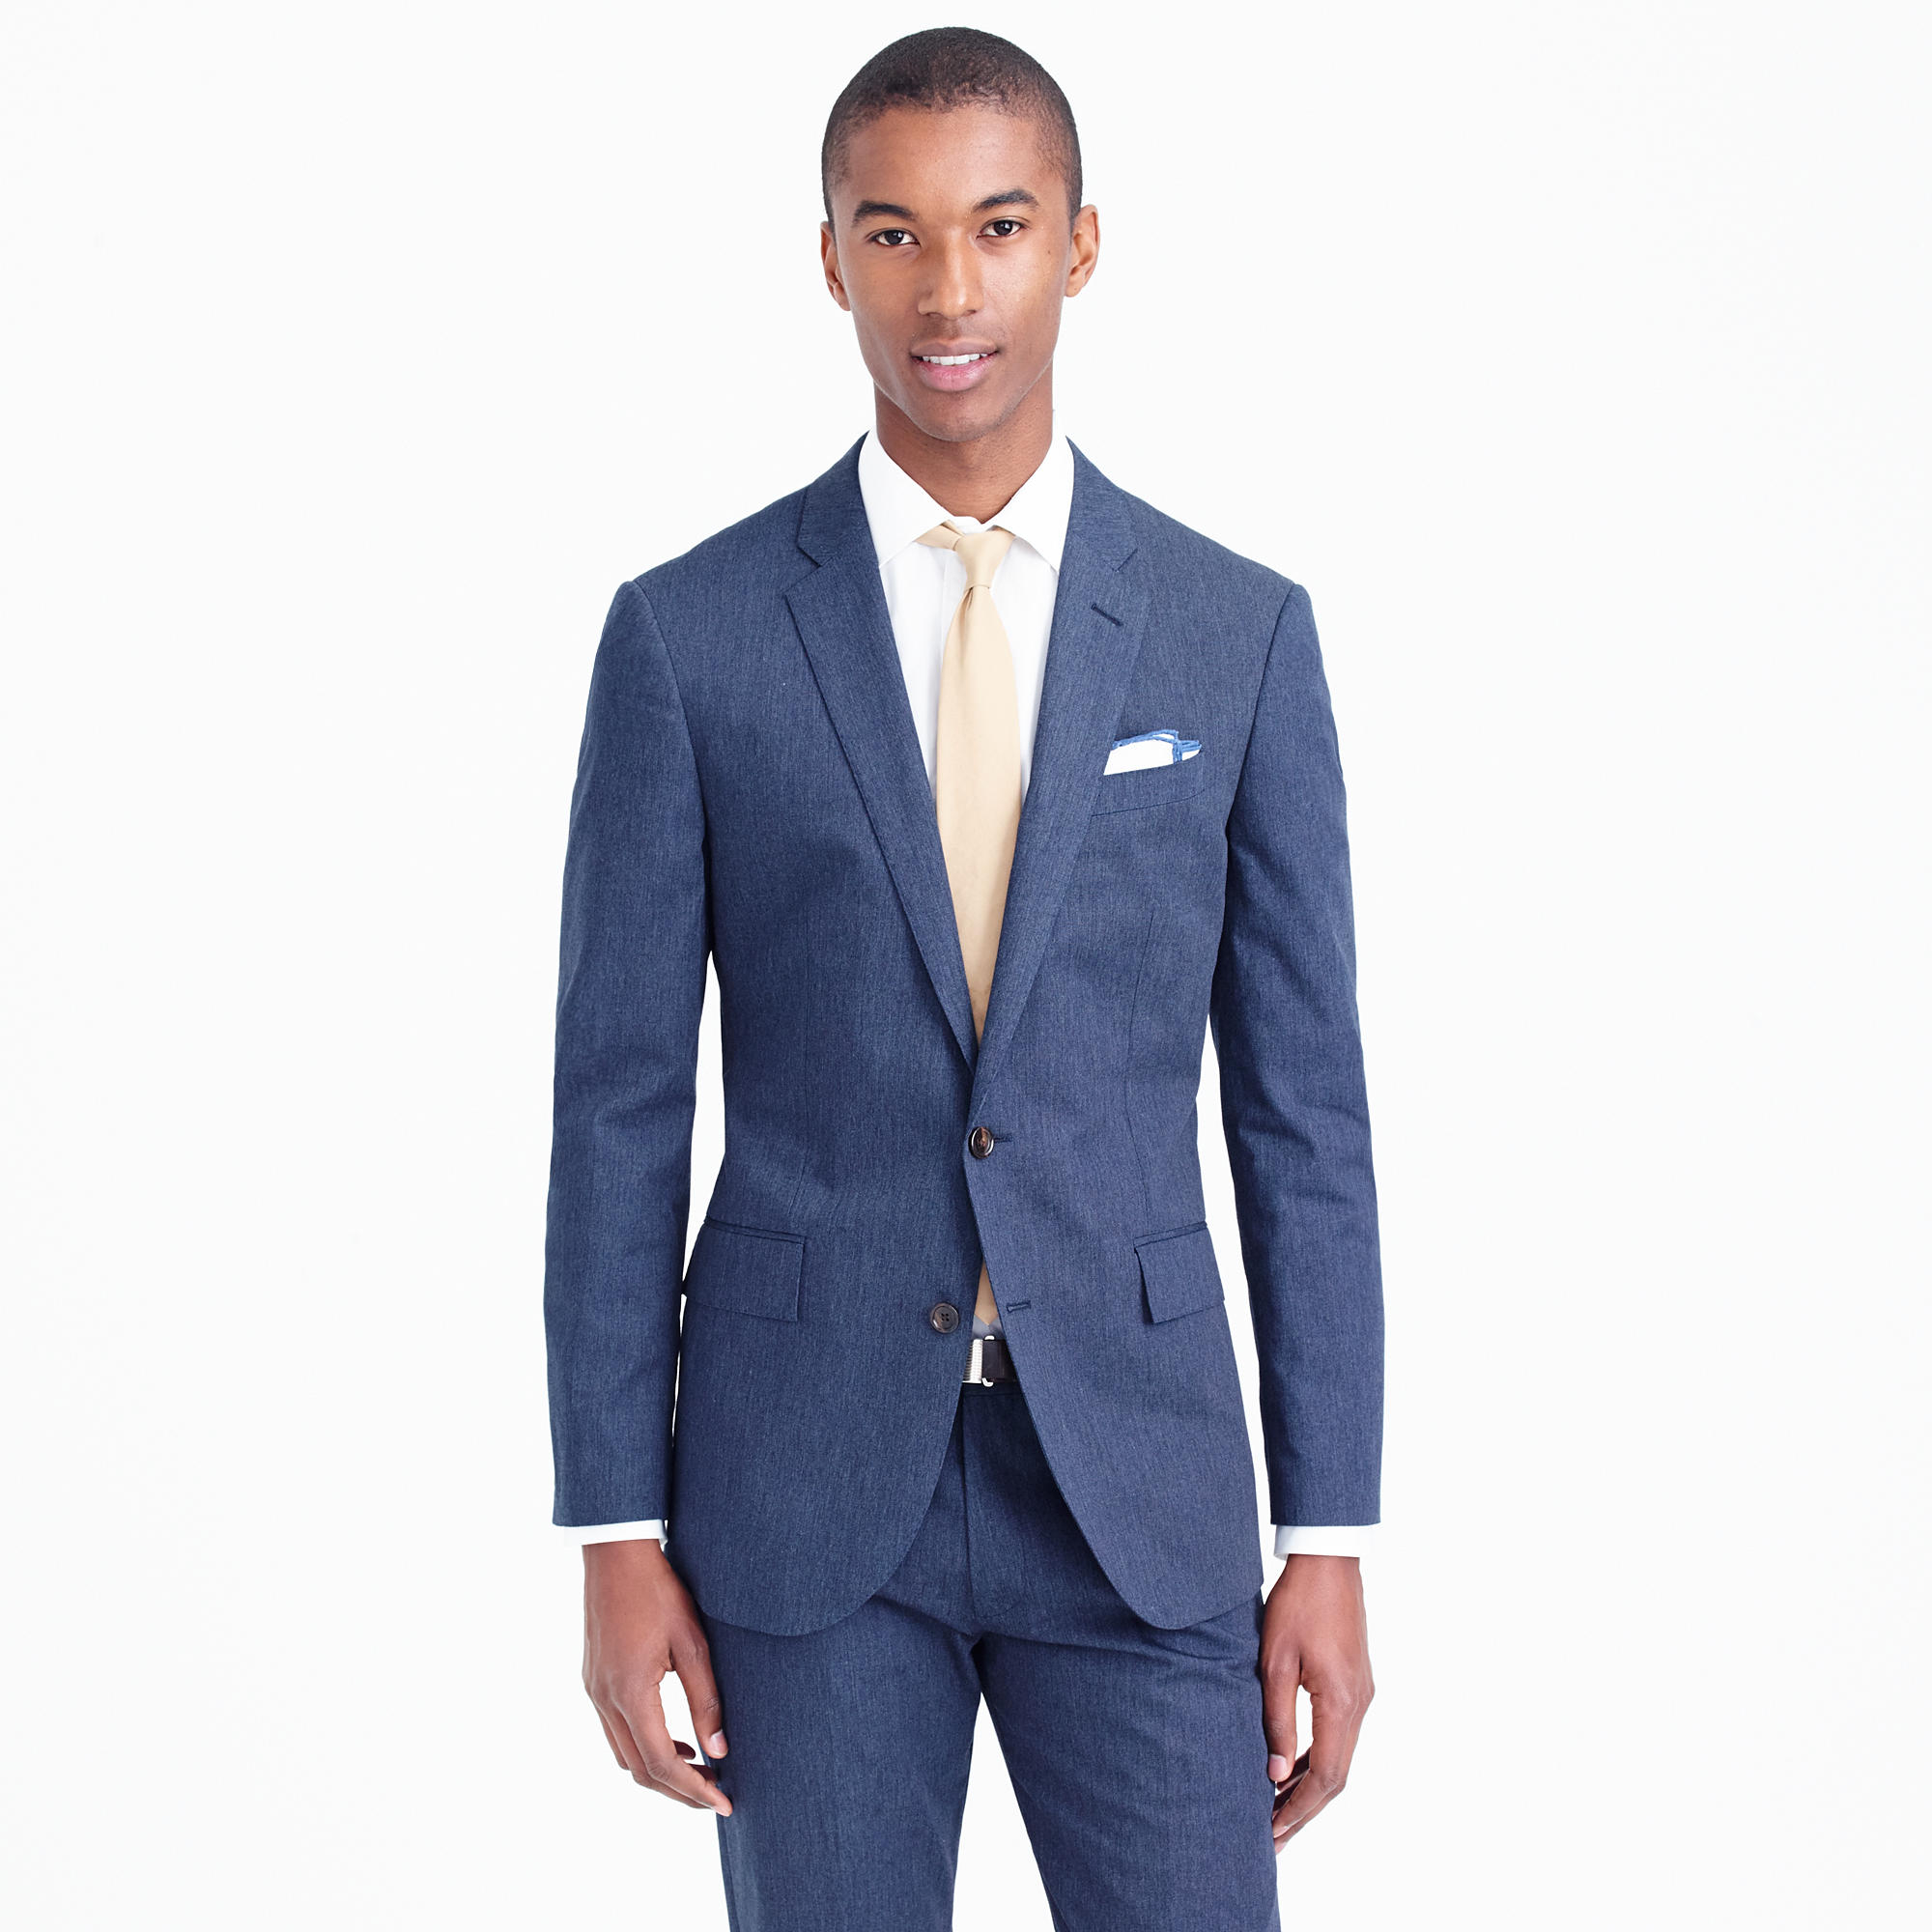 Lyst - J.Crew Ludlow Suit Jacket In Heathered Cotton in Blue for Men